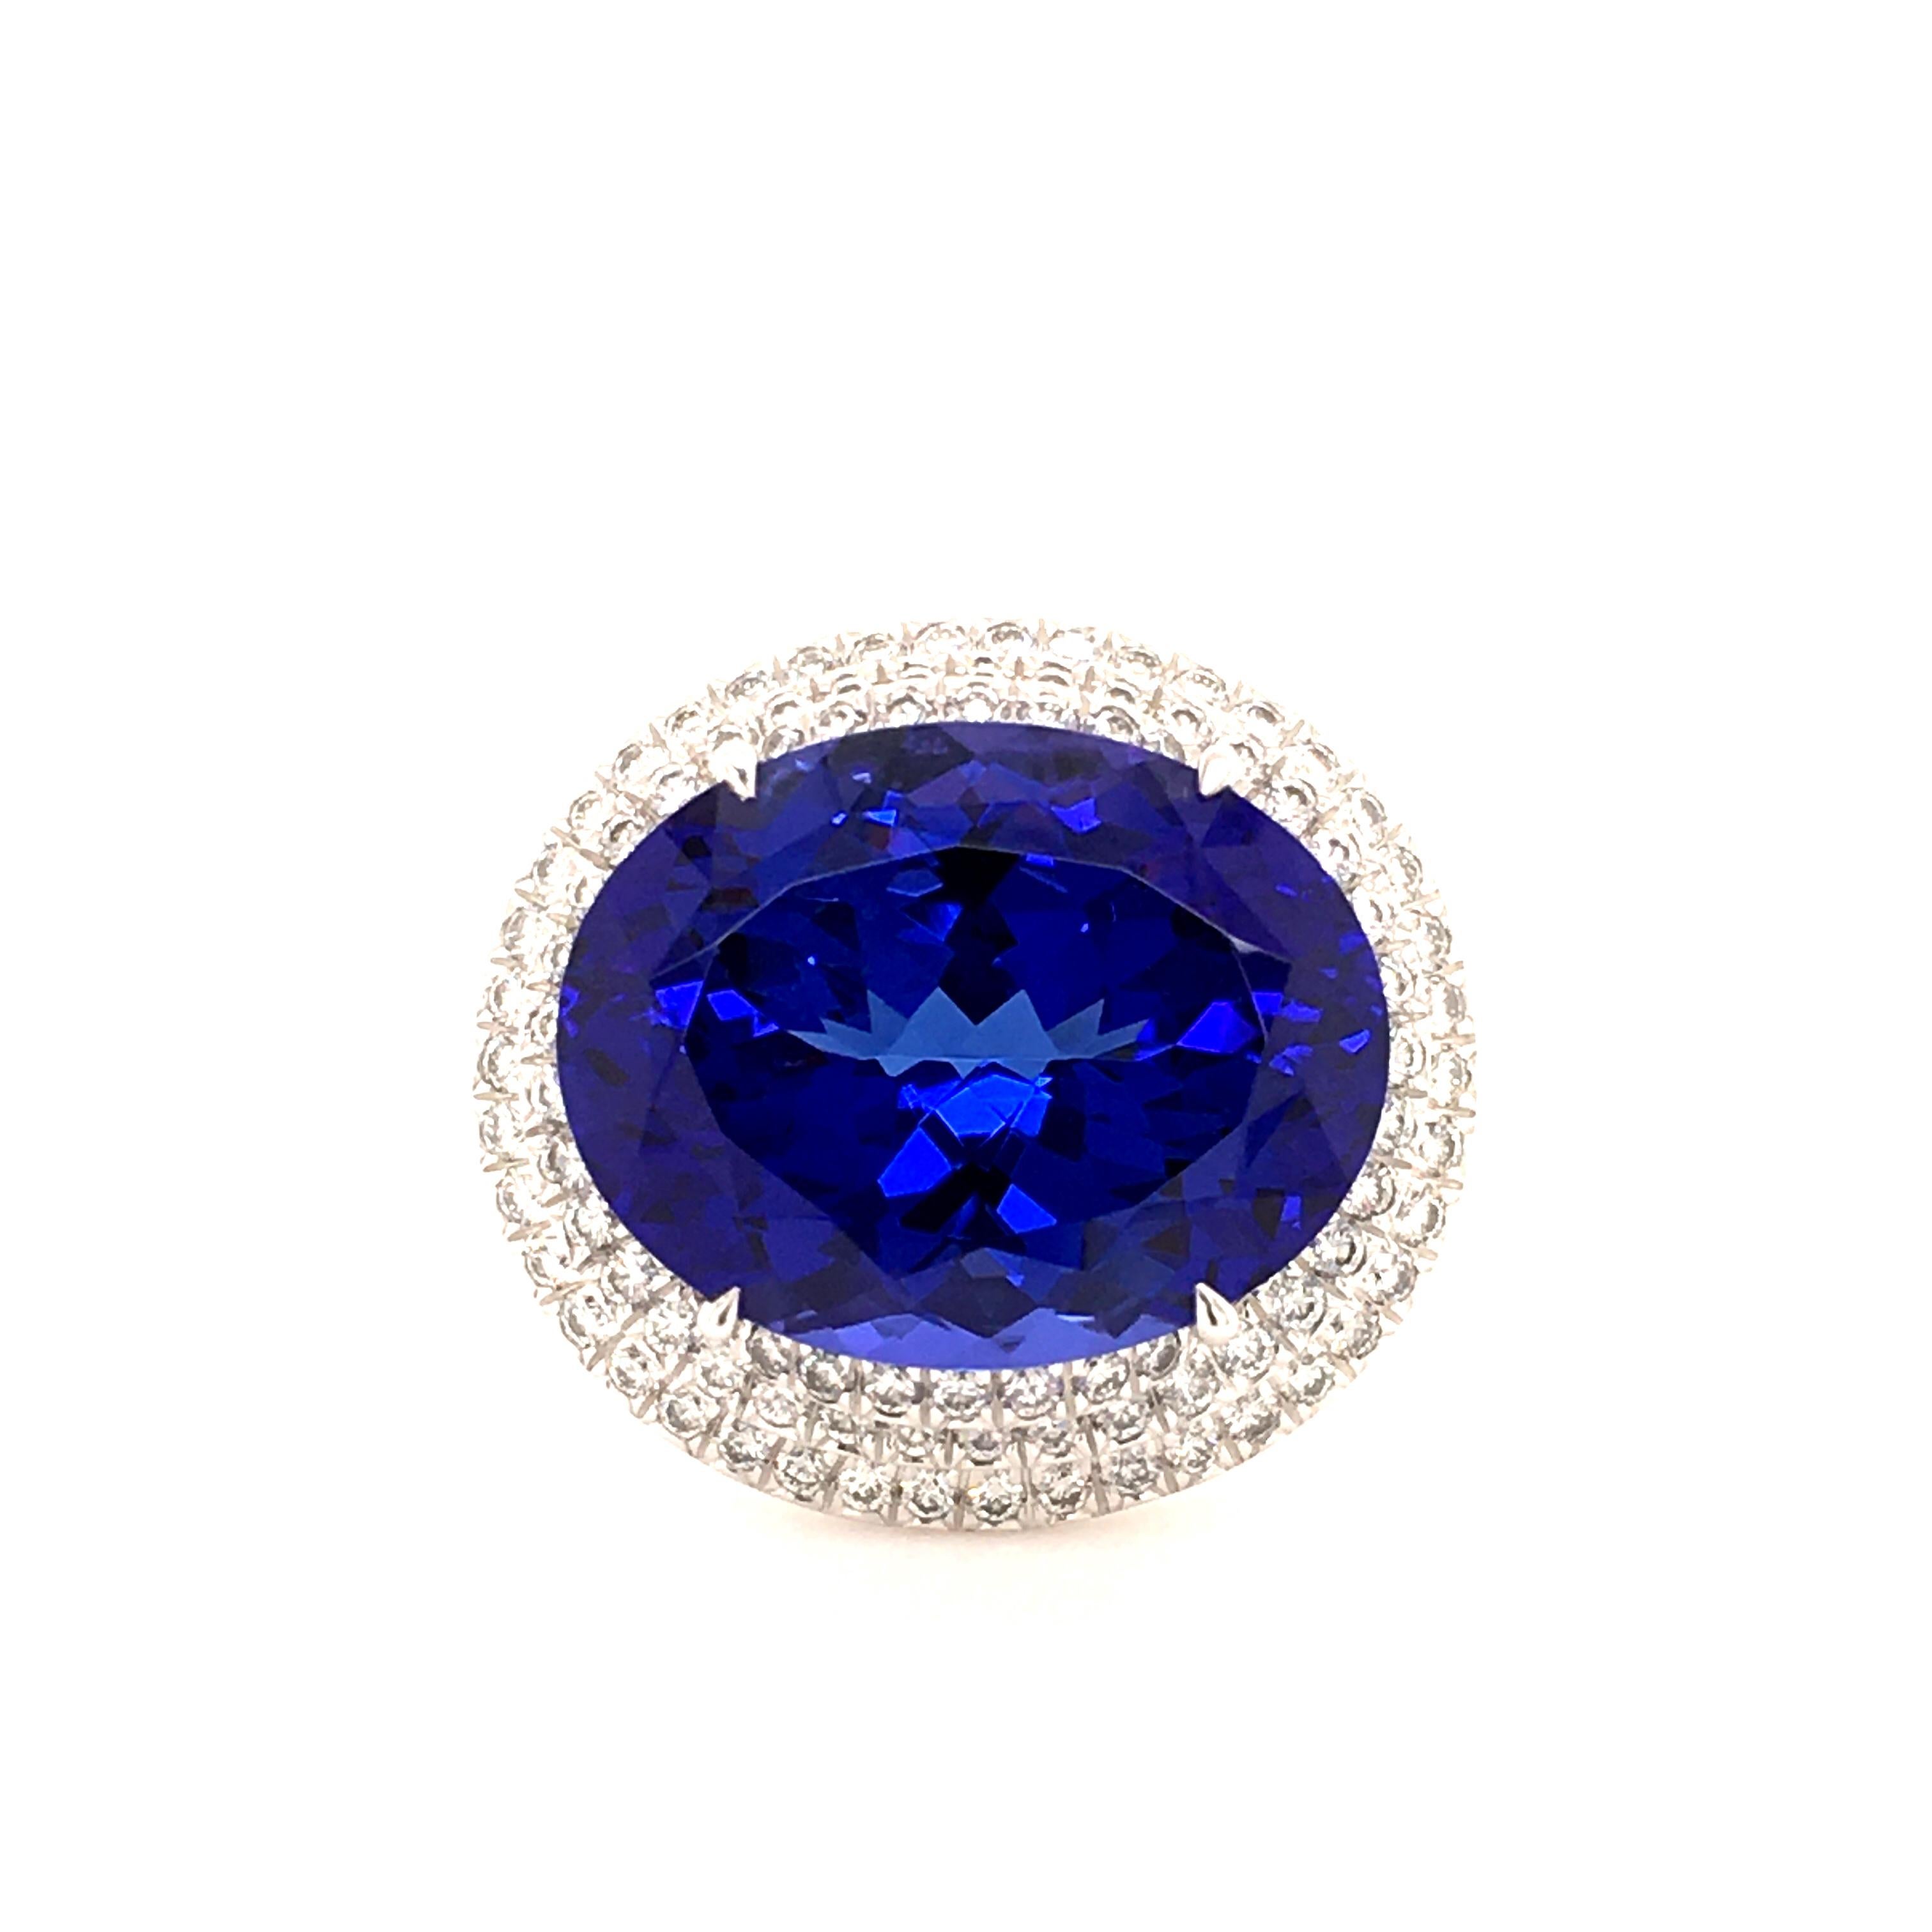 Very fine oval tanzanite of 23.39 ct set in a Gubelin ring in 18 karat white gold. Double entourage set with 134 high quality diamonds (F/G-vs) totalling 1.94 ct. The Swiss, family-owned House of Gübelin, was founded in 1854 and is known for its